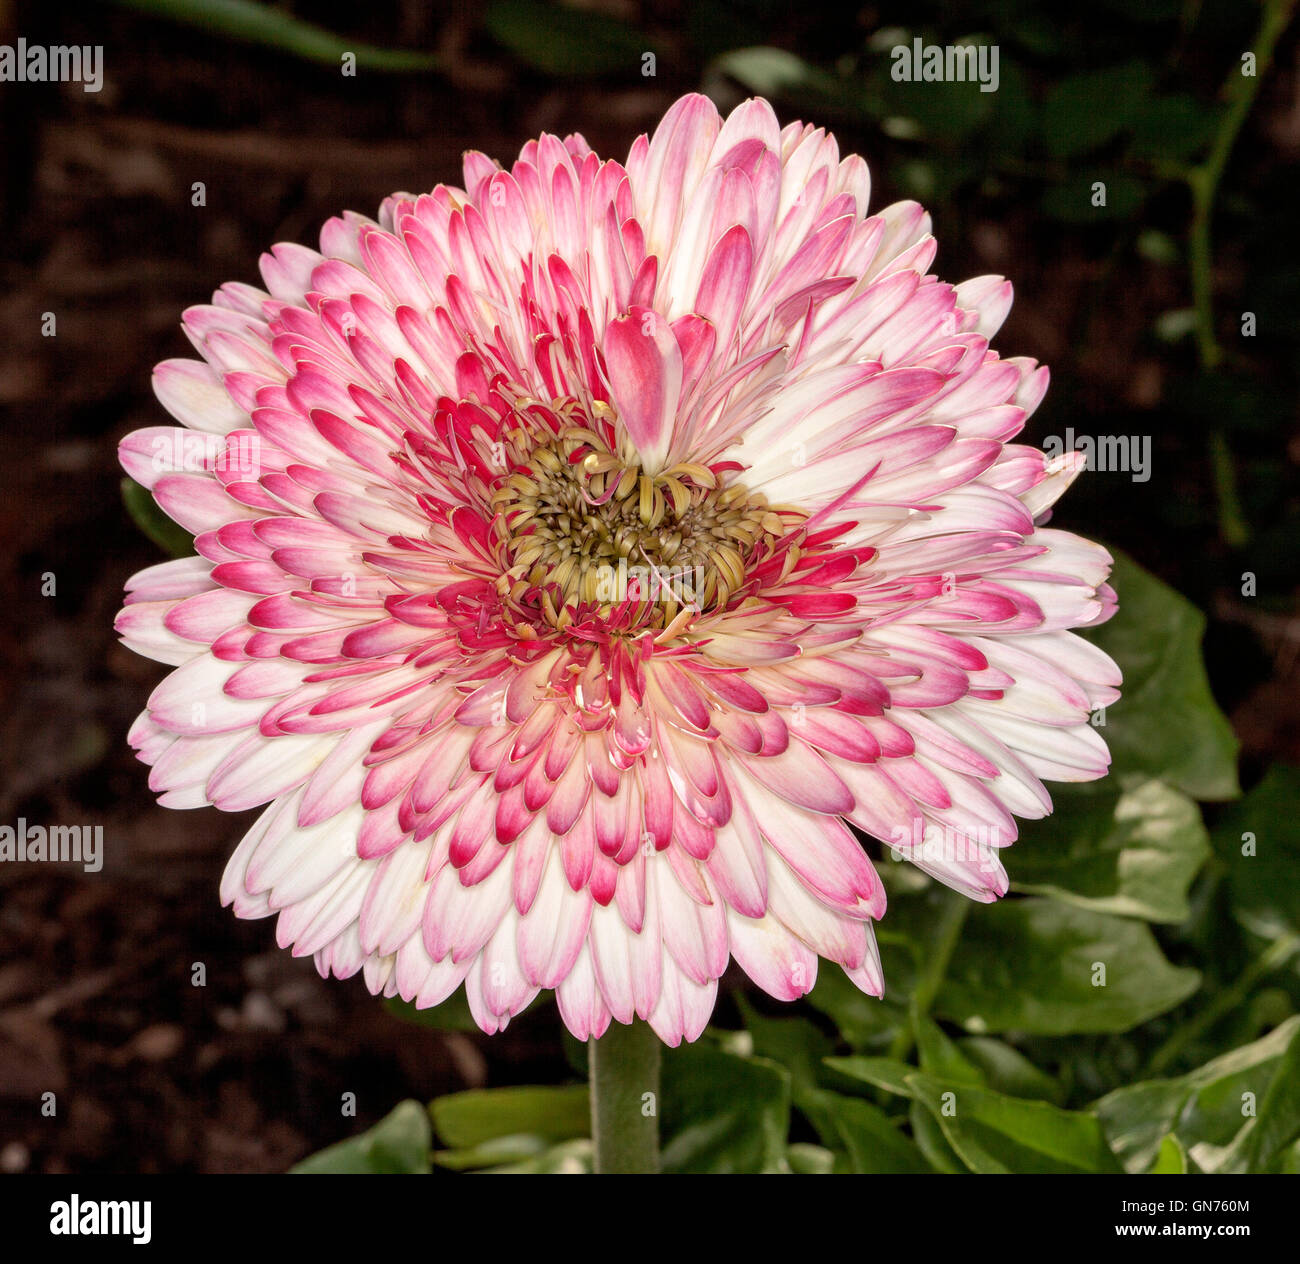 Spectacular & unusual large pink and white flecked double gerbera flower with emerald green leaves on dark background Stock Photo